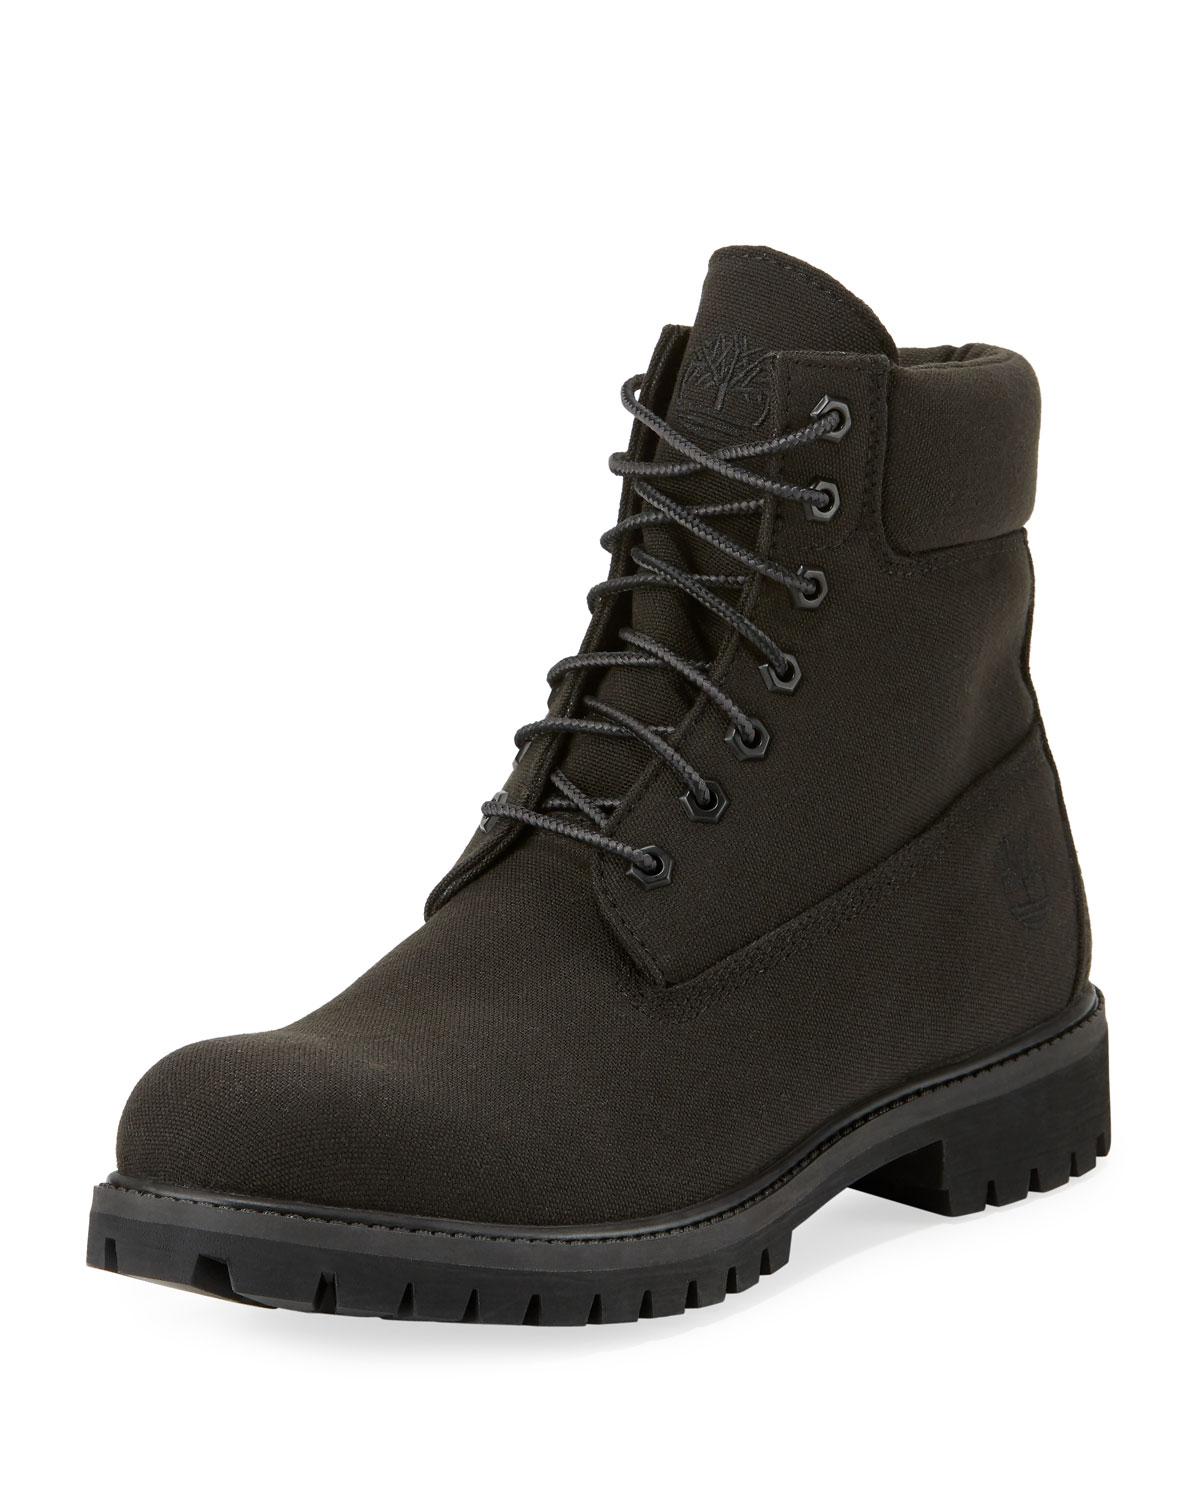 timberland canvas boots black